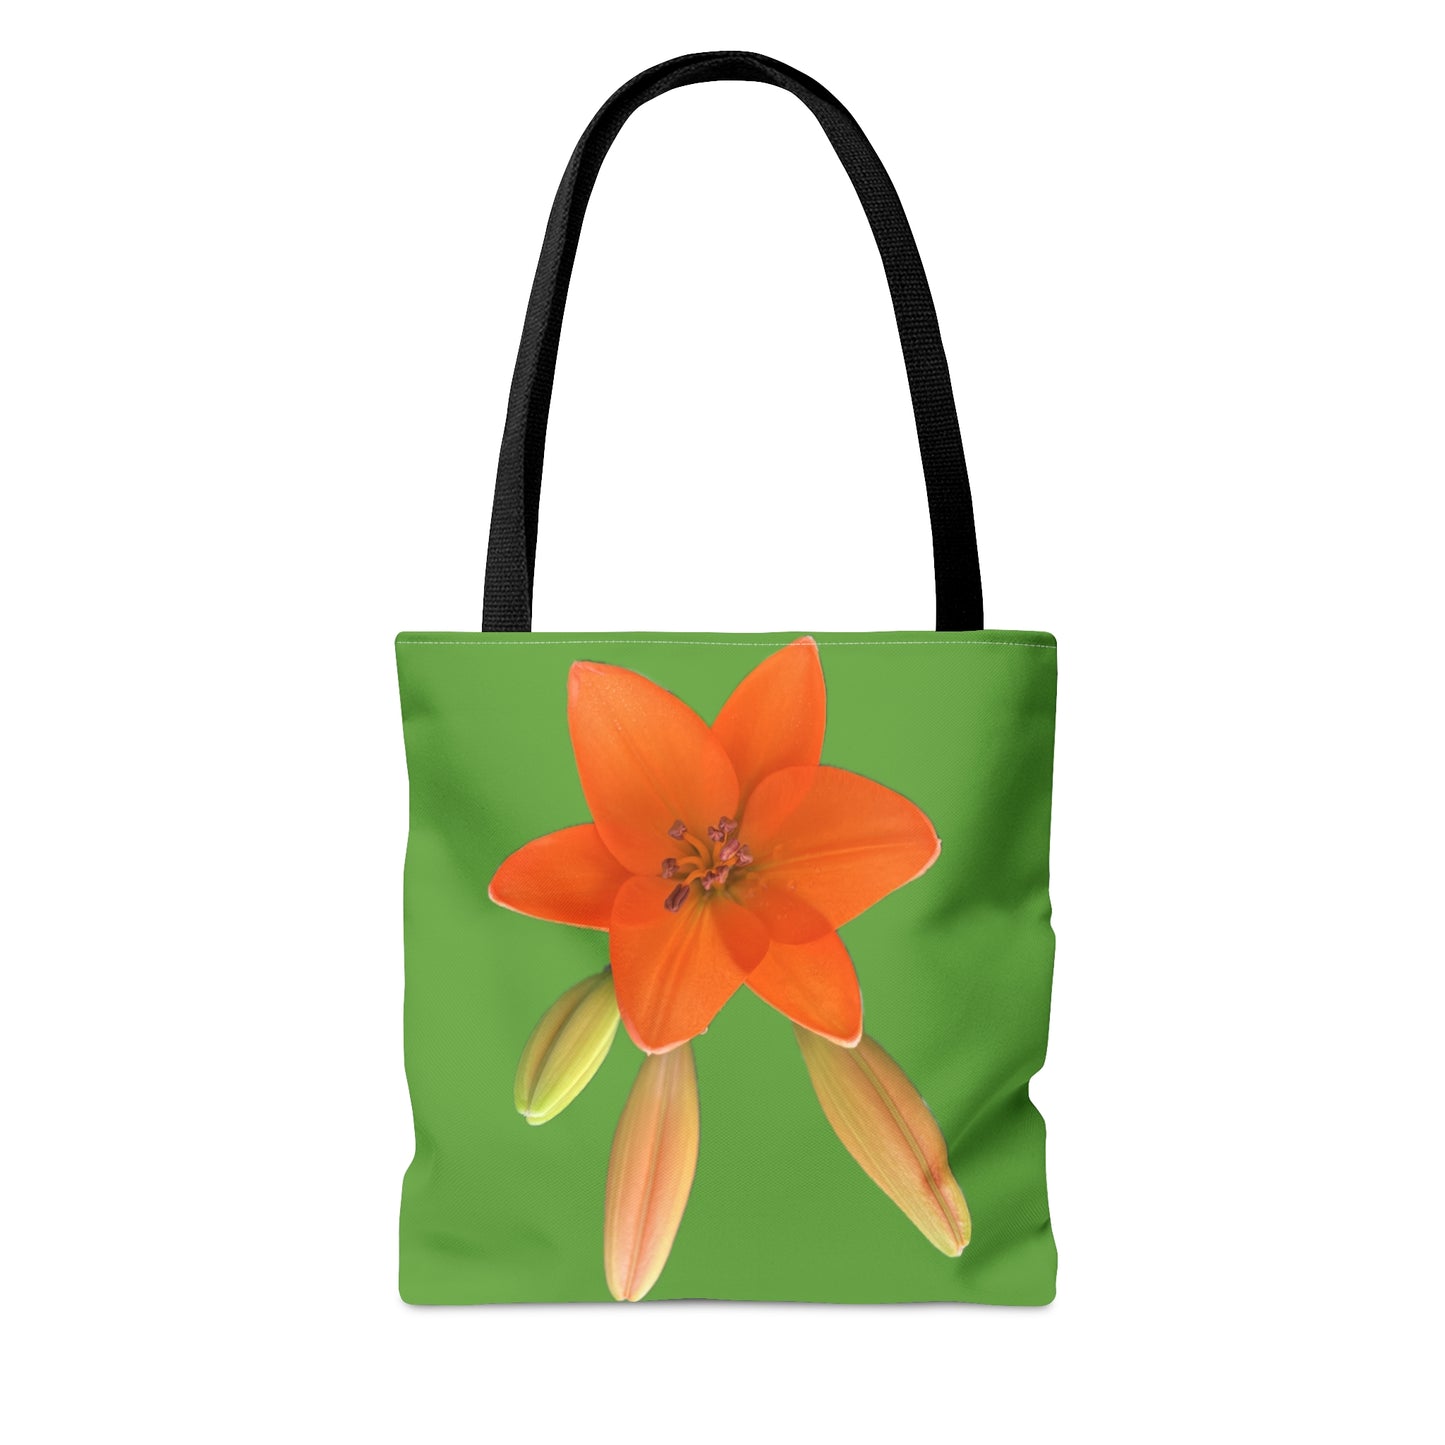 Handcrafted Grocery Tote from Made with Love